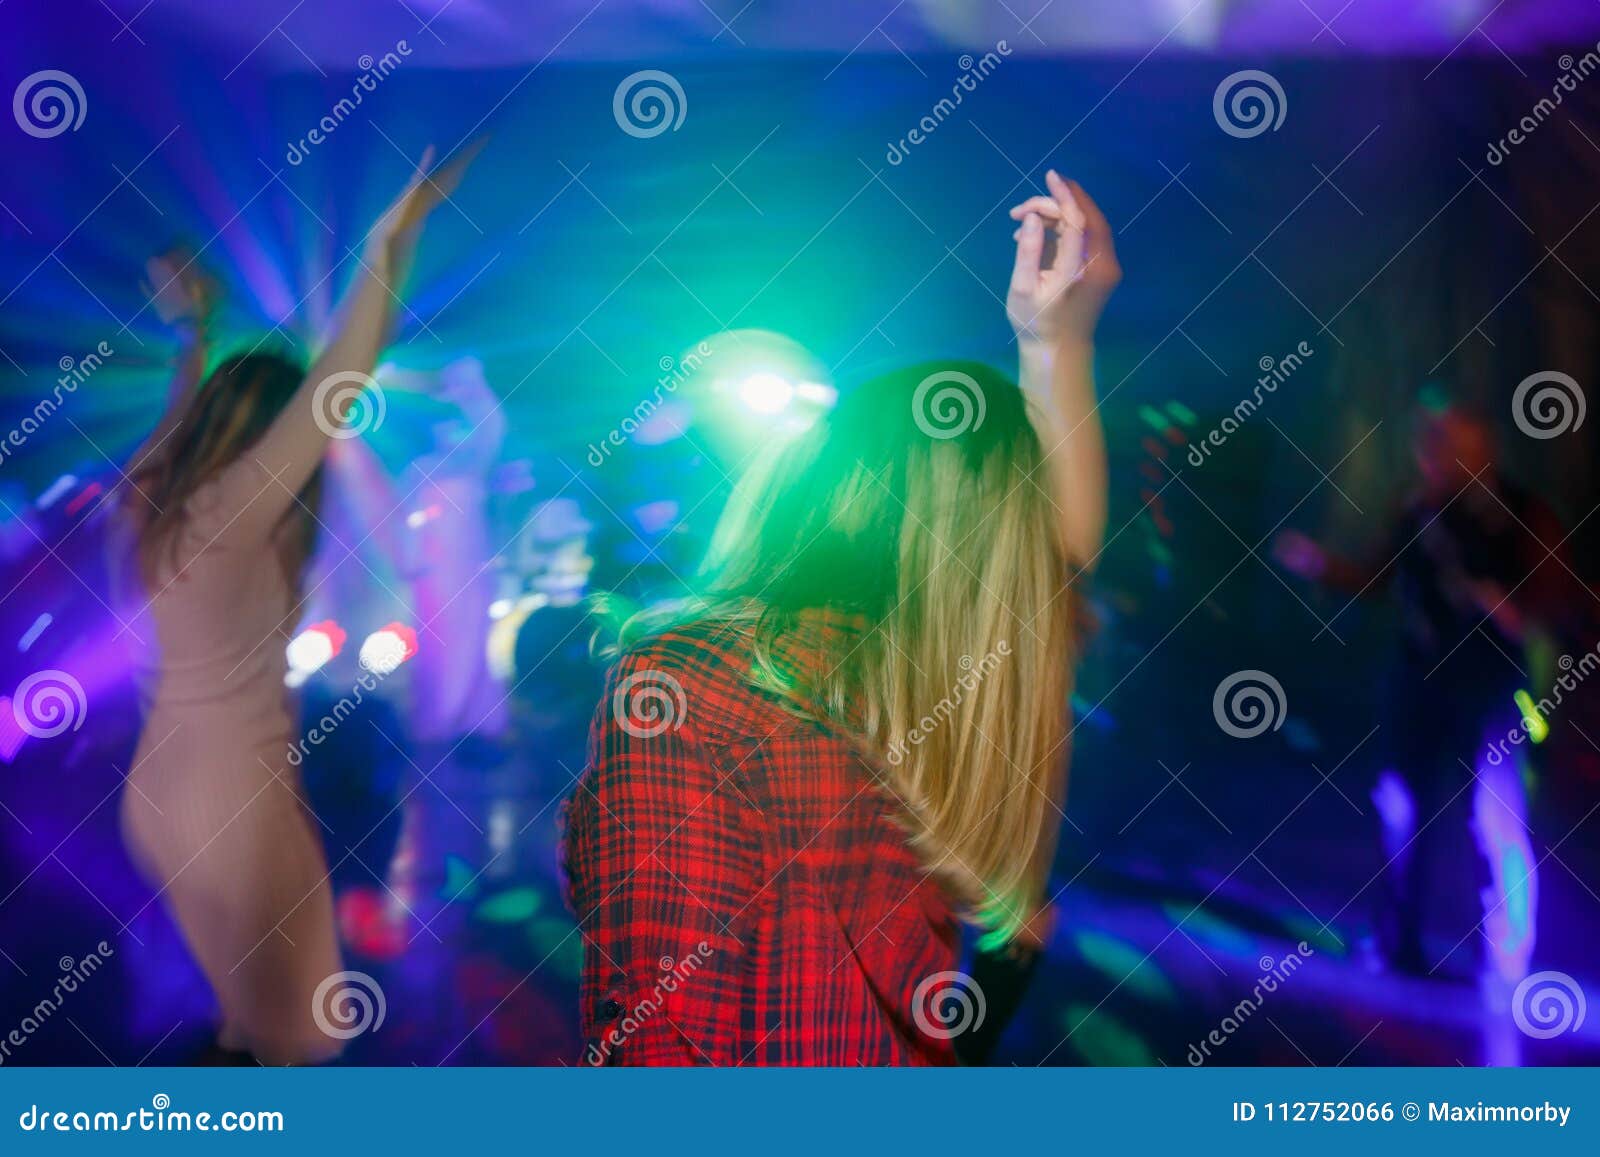 The Girl is Dancing with Her Back on the Dance Floor. Multicolored ...